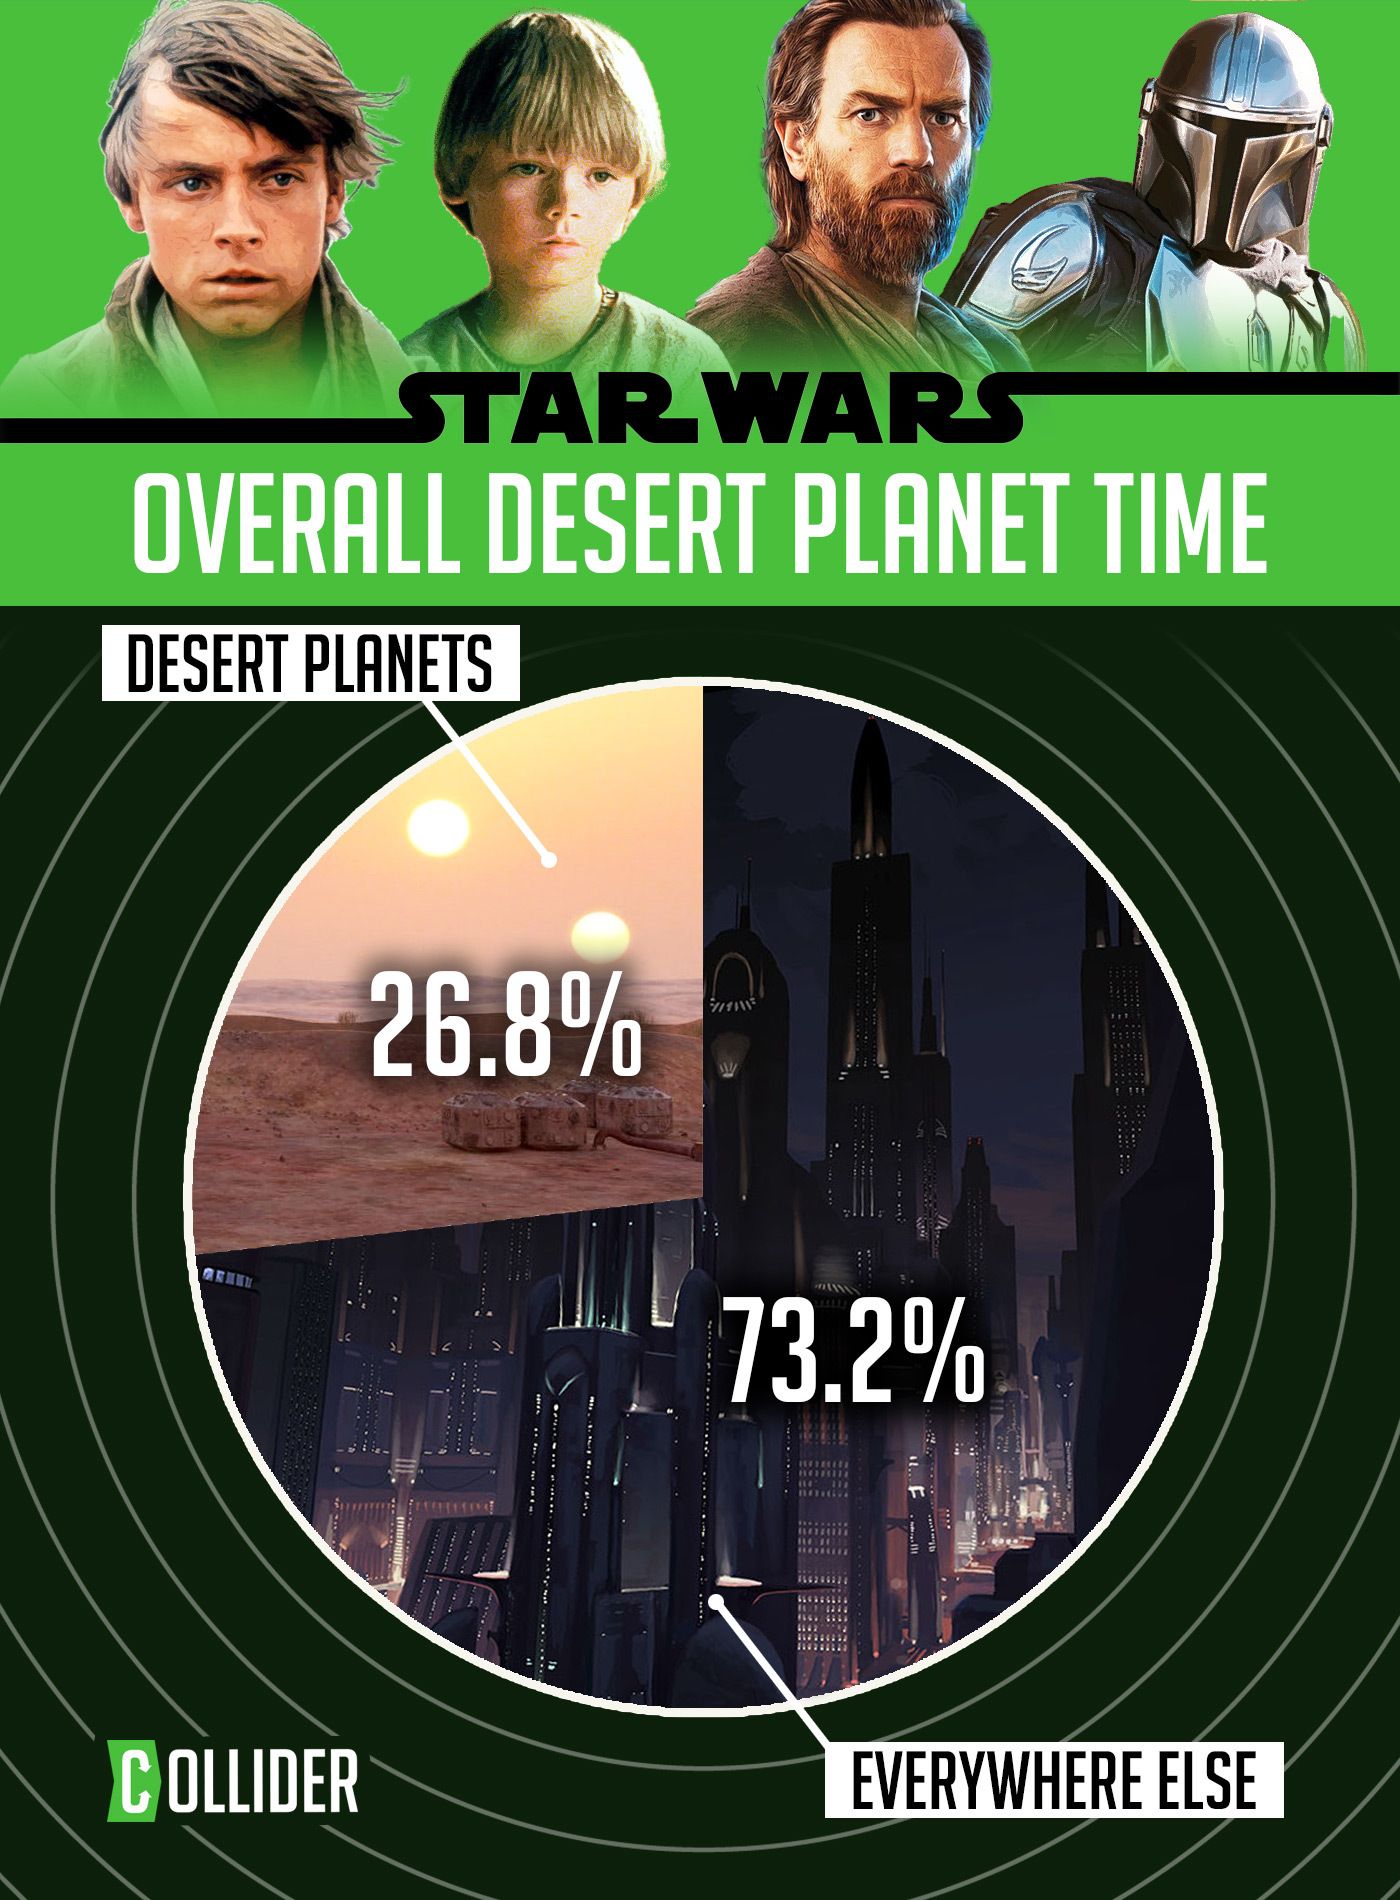 Infographic of the time spent on sand planets in all star wars Star Wars series and movies